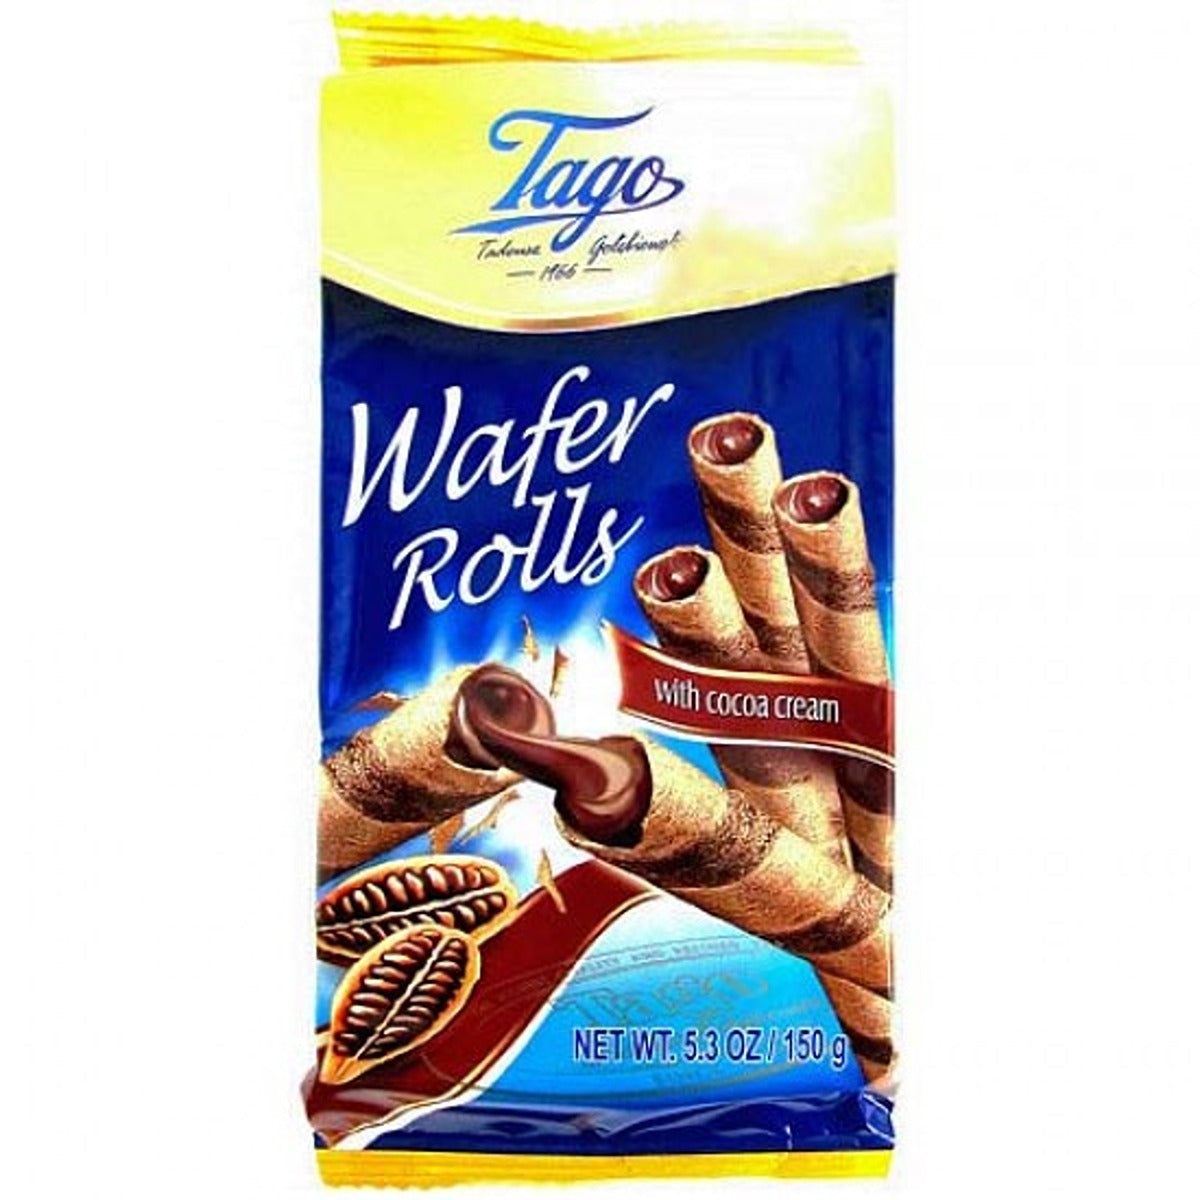 A bag of Tago - Wafer Rolls with Cocoa Cream on a white background.